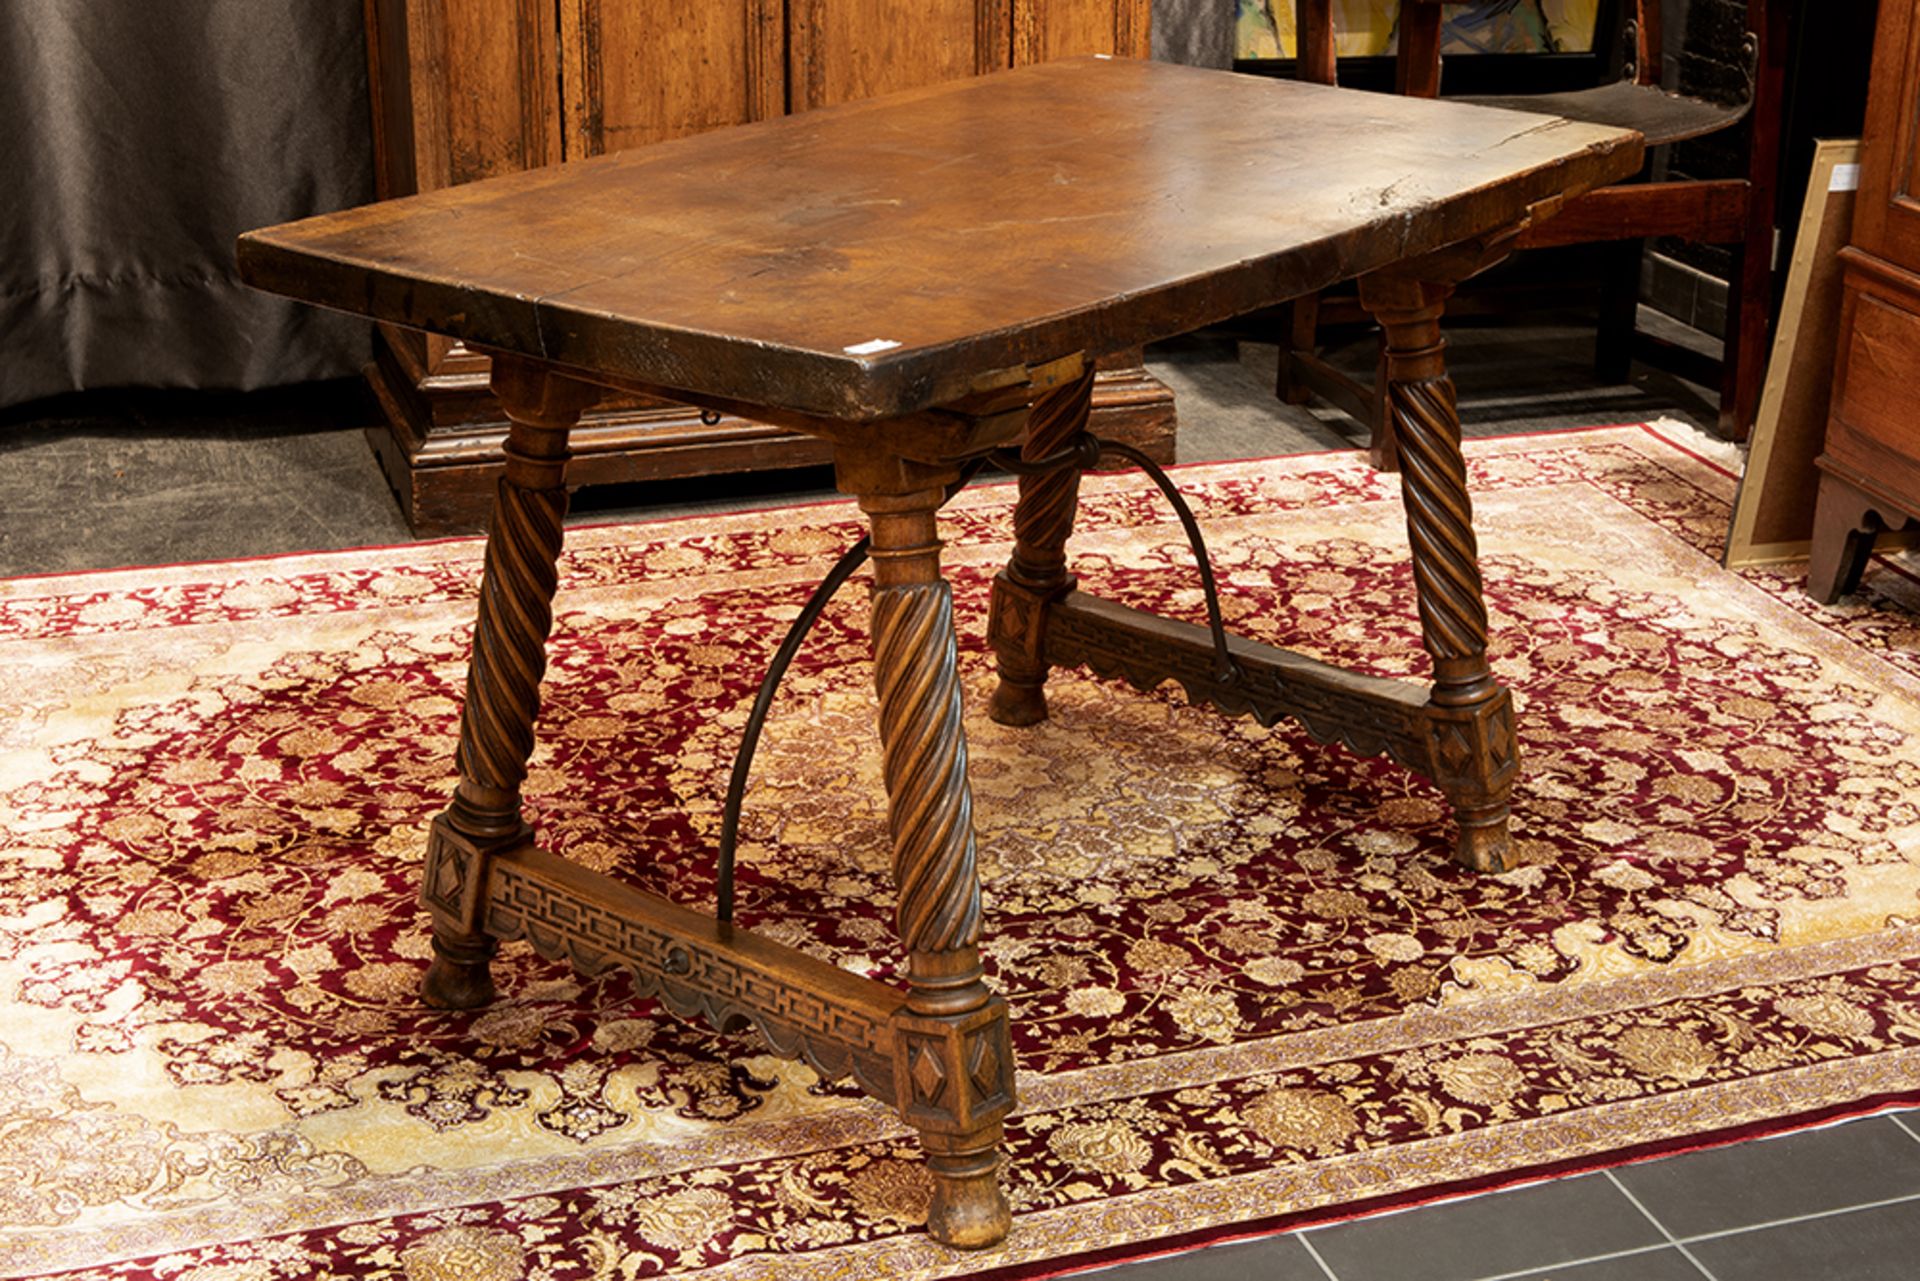 17th Cent. Spanish table in walnut with a typical iron connection between the legs || Zeventiende - Image 2 of 2